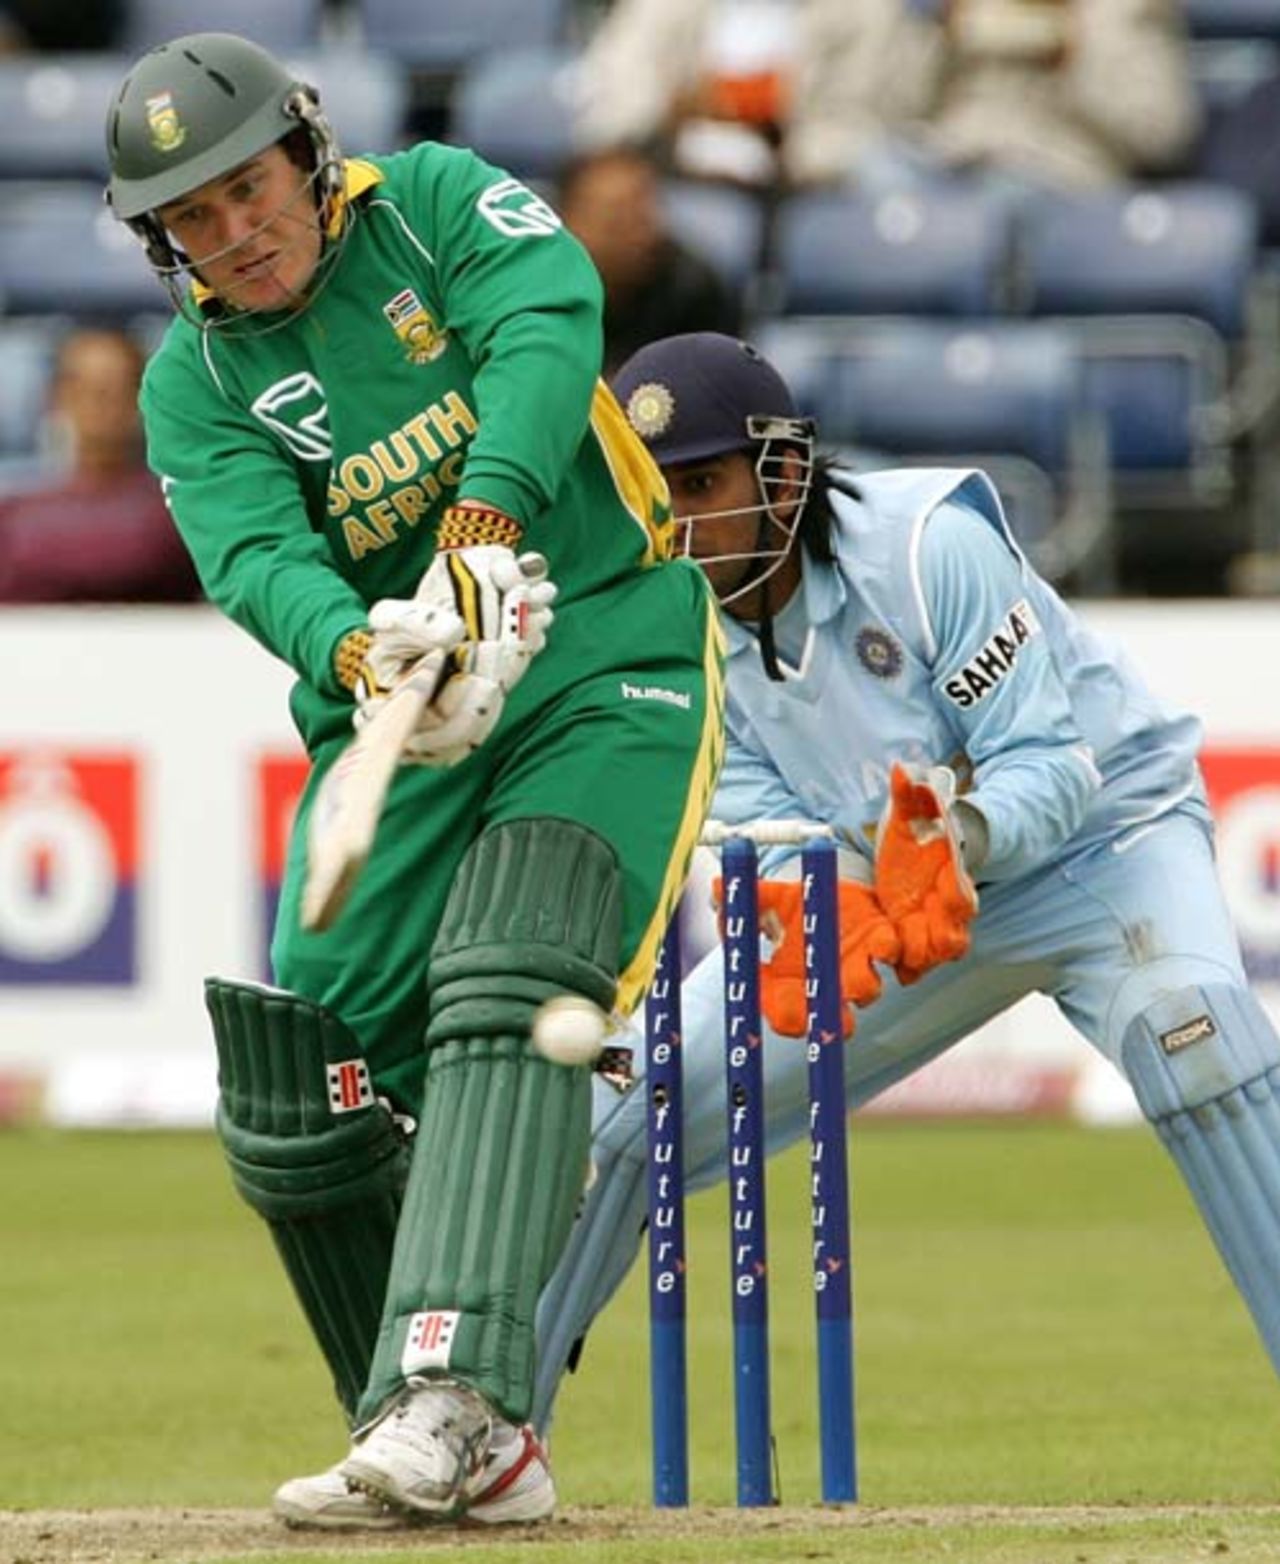 Morne van Wyk works the ball to midwicket  during his 82-run knock as  MS Dhoni watches, India v South Africa, 2nd ODI, Belfast, June 29, 2007